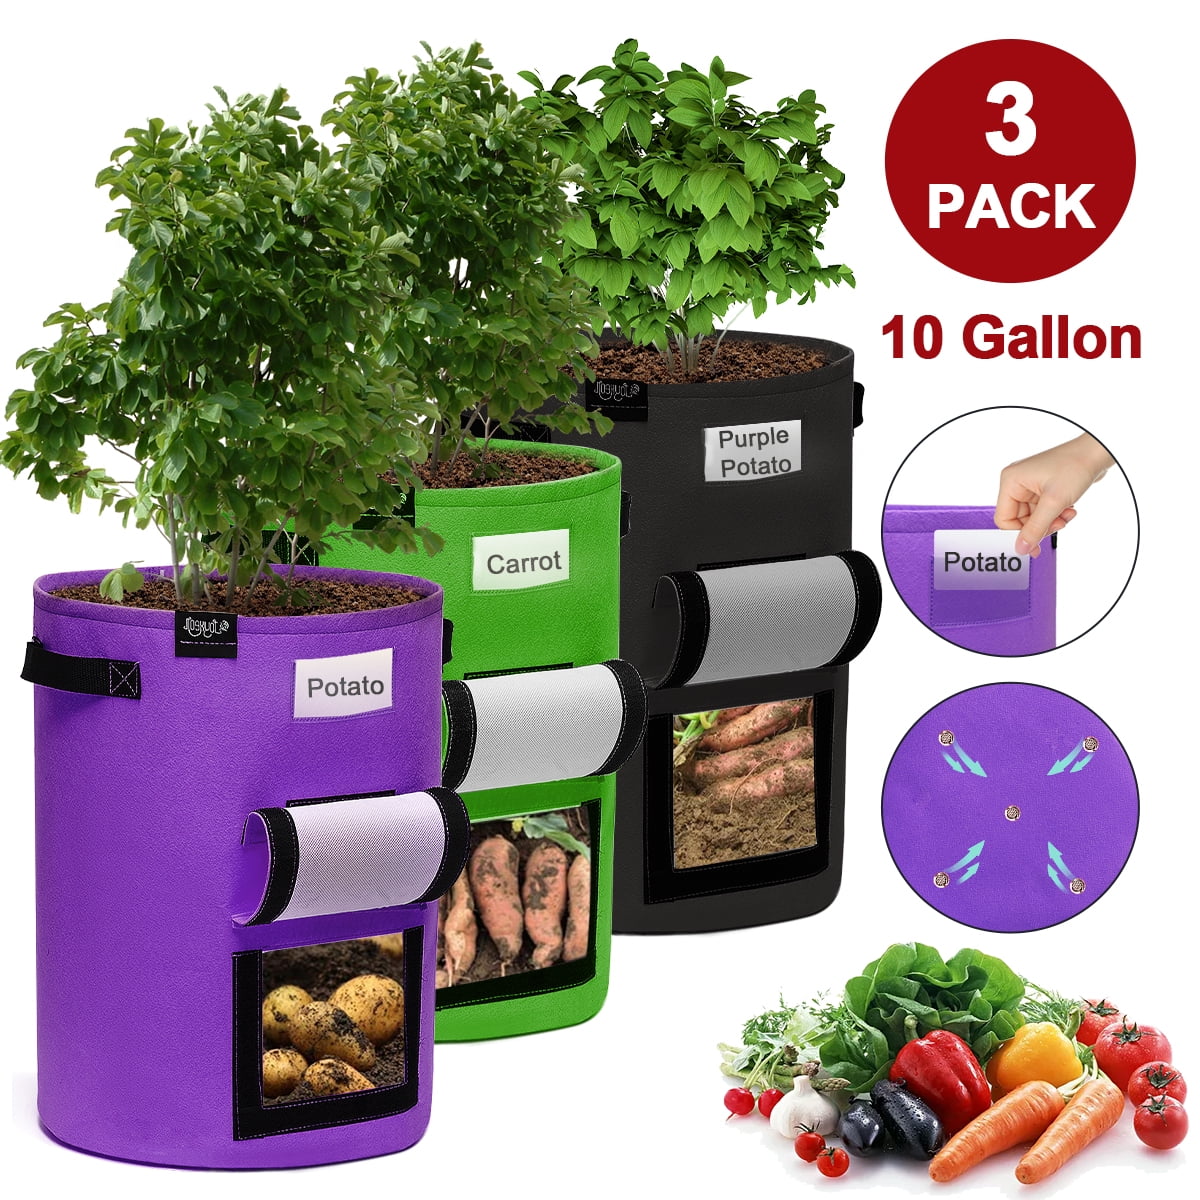 MFOX 3 Pack 10 Gallon Potato Grow Bags,Garden Planting Bags,Non-Woven Aeration Fabric Pot Growing Bags,Vegetables Planter Bags with Handle and Access Flap 